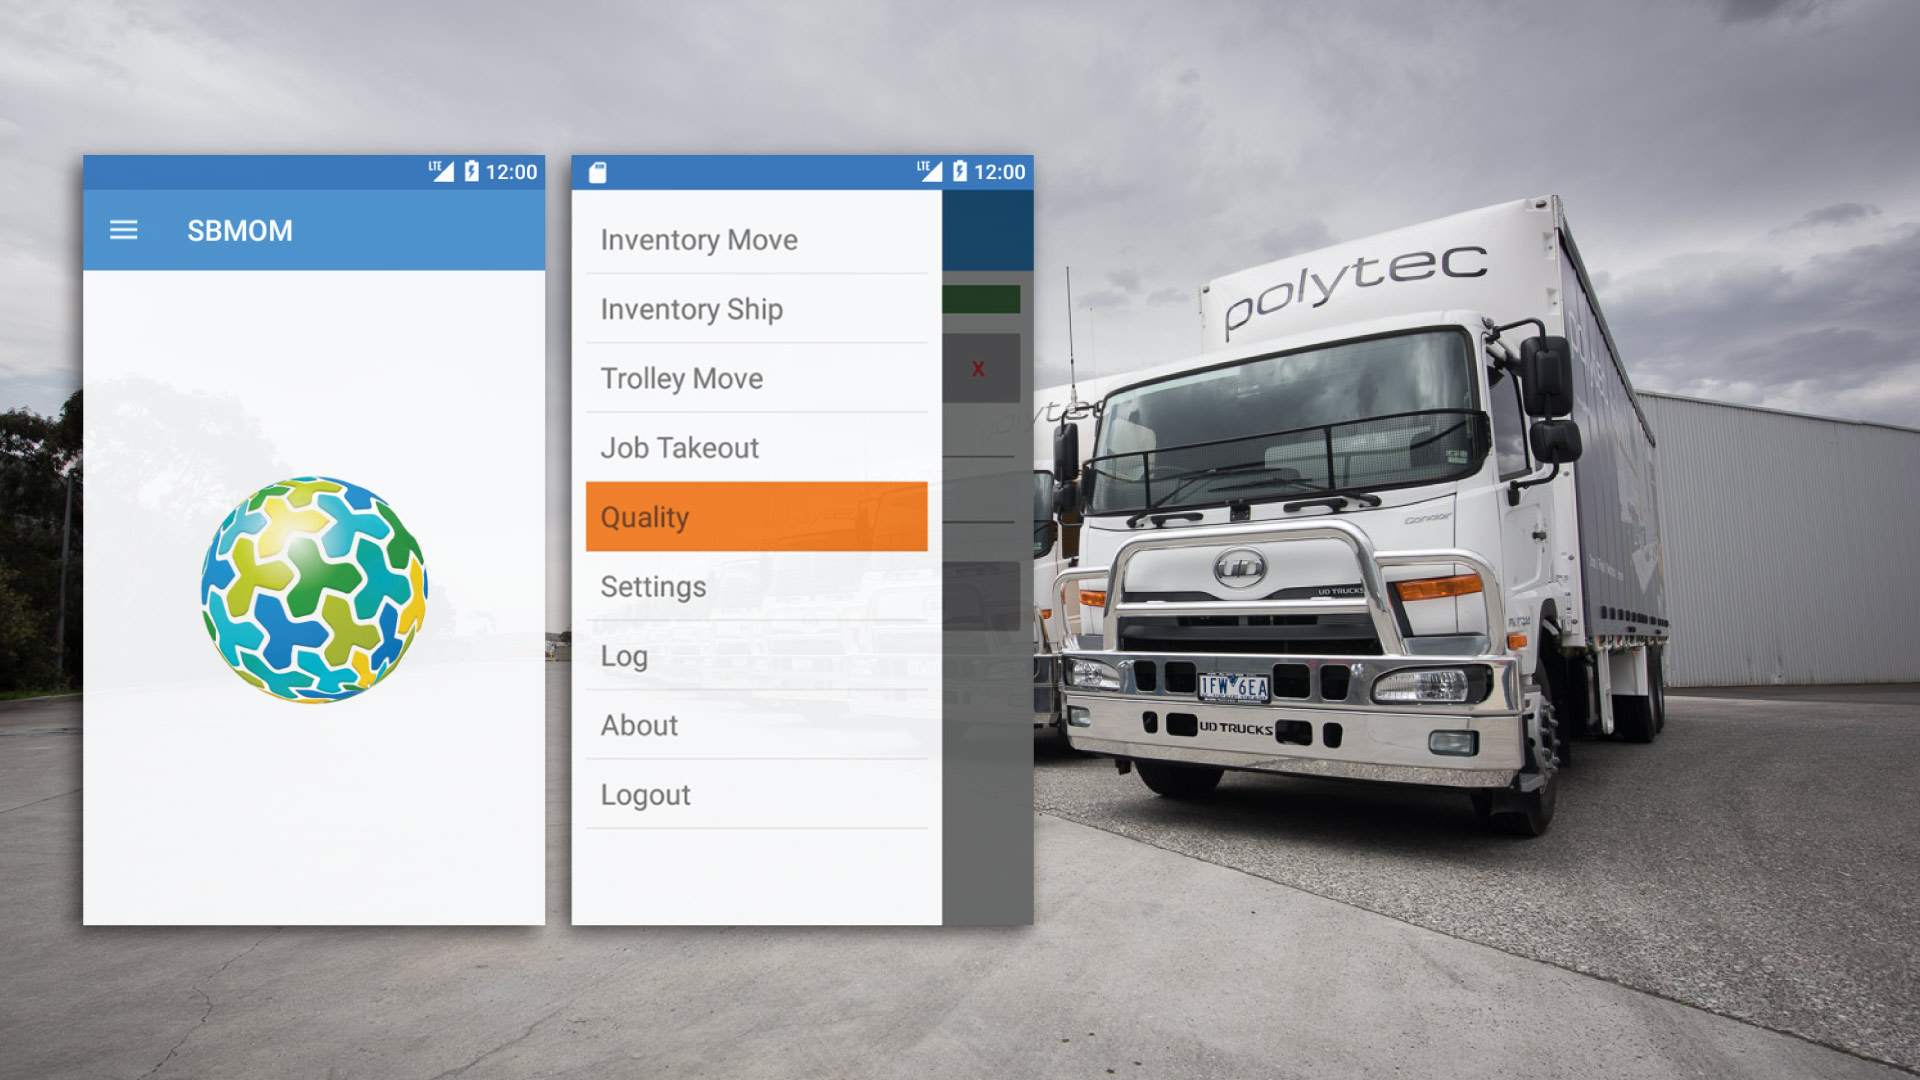 The power of Wonderware MES and Crossmuller Warehousing in a Mobile Application